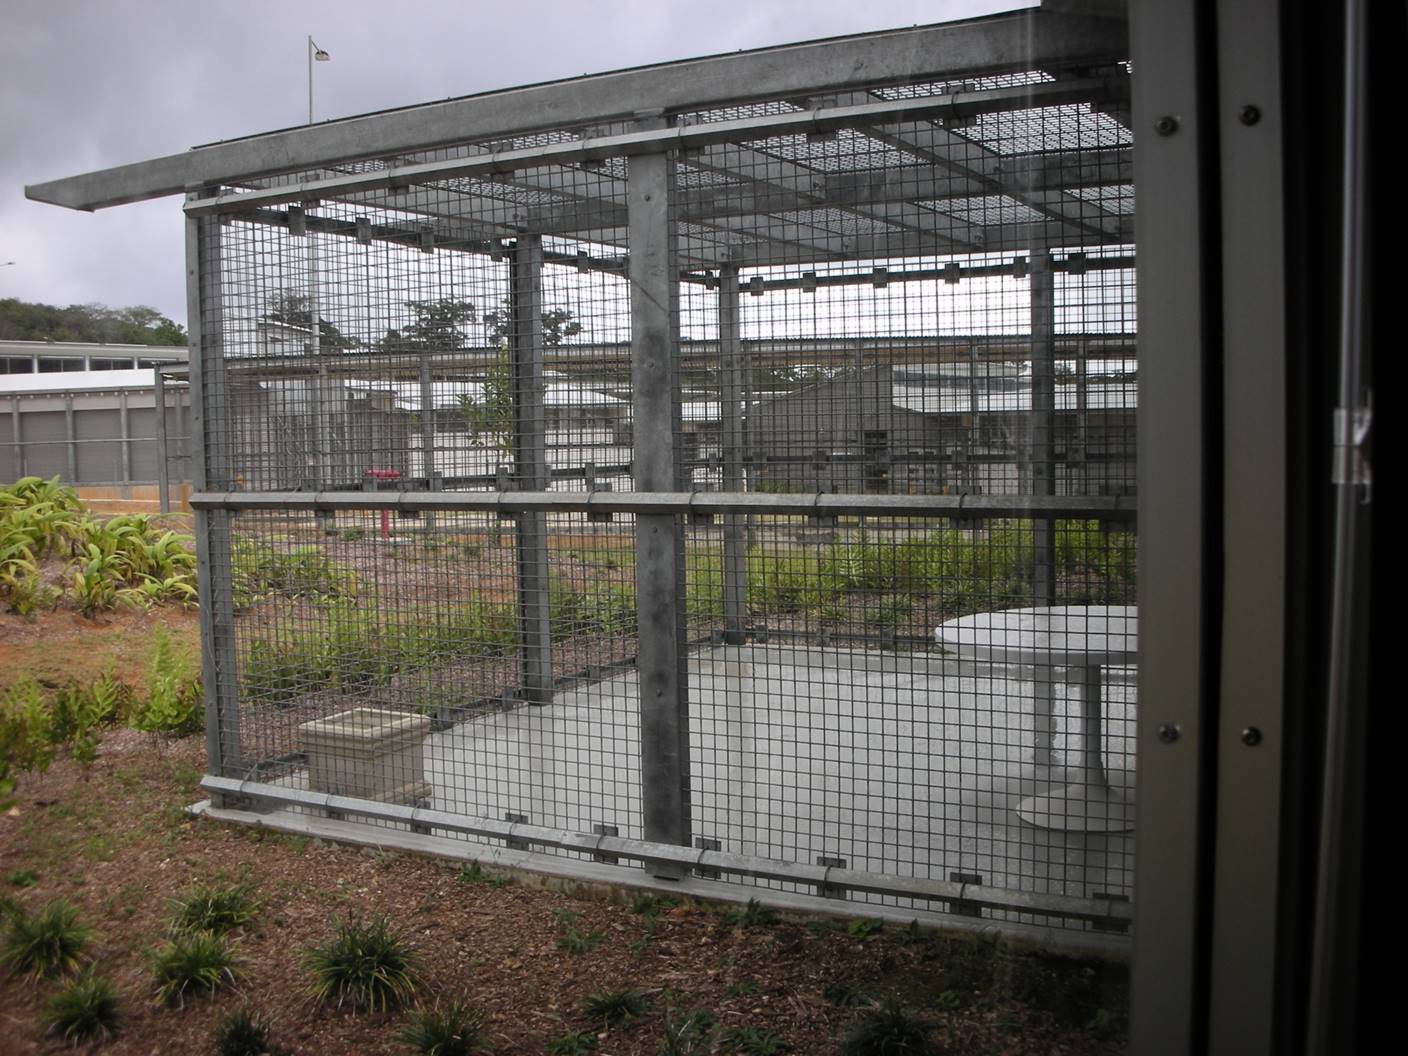 Christmas Island is a dangerous and inhumane response to rising COVID-19 risk in immigration detention